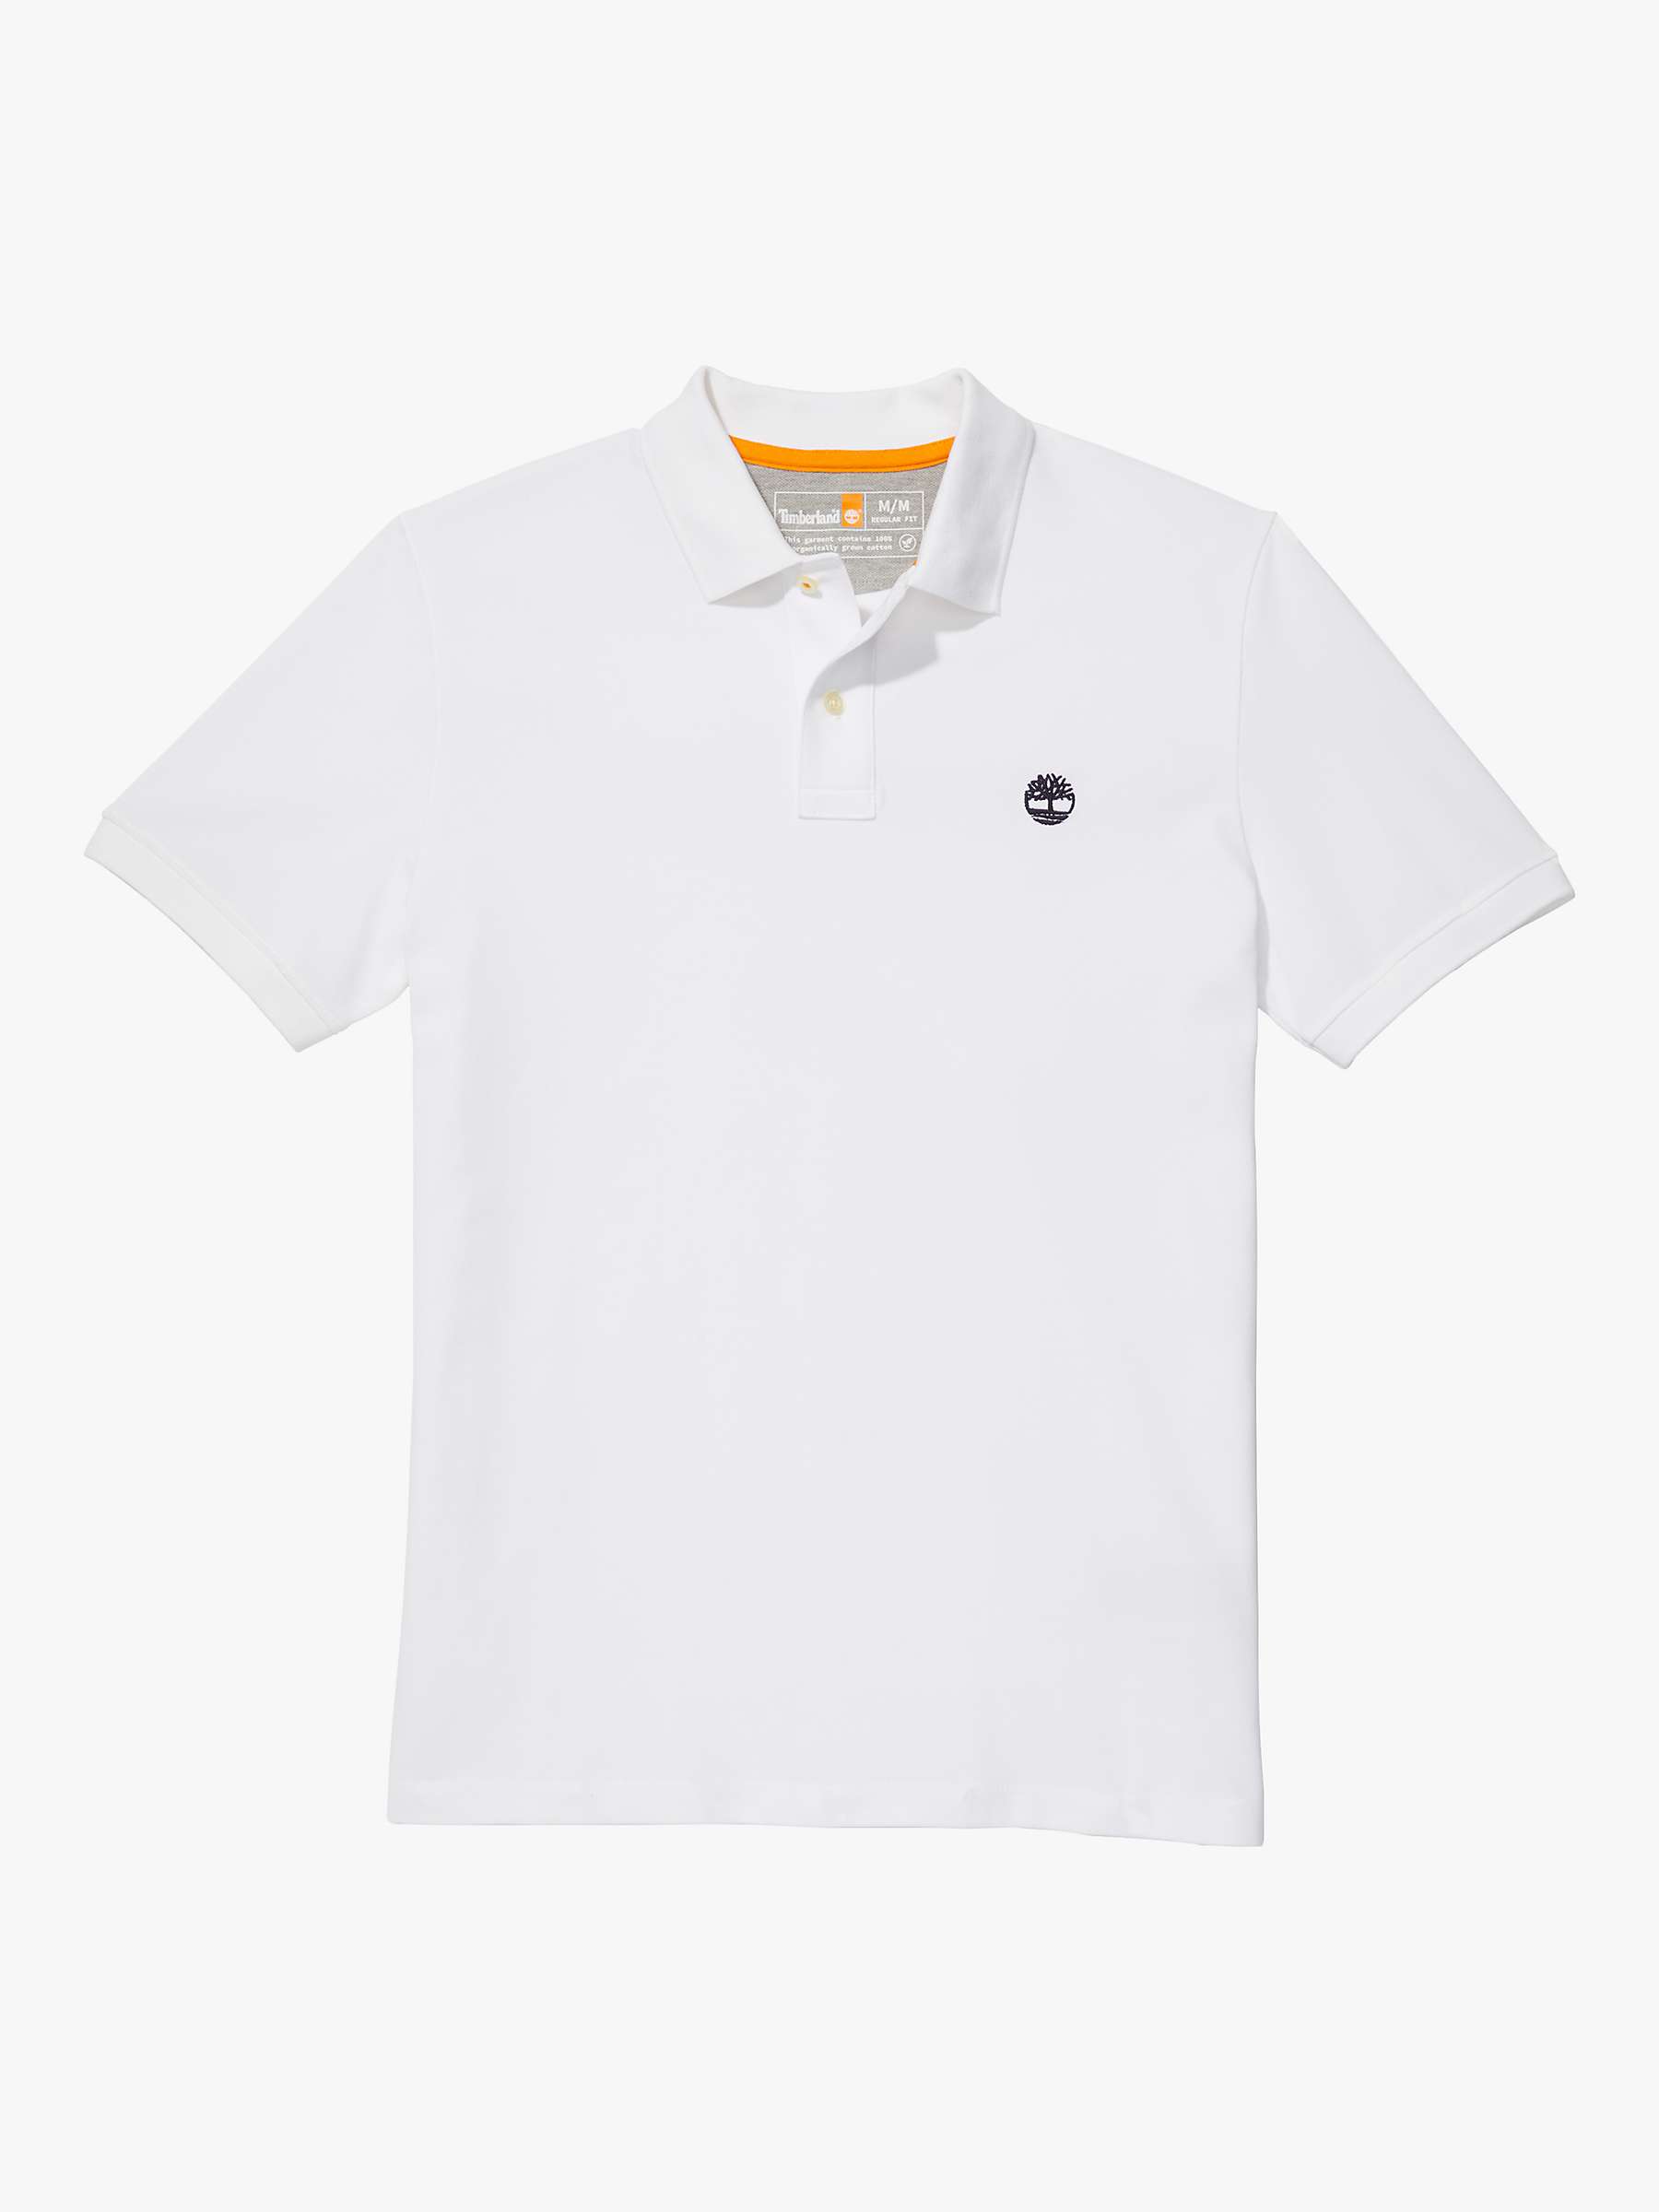 Buy Timberland Millers Organic Cotton Pique Polo Shirt Online at johnlewis.com